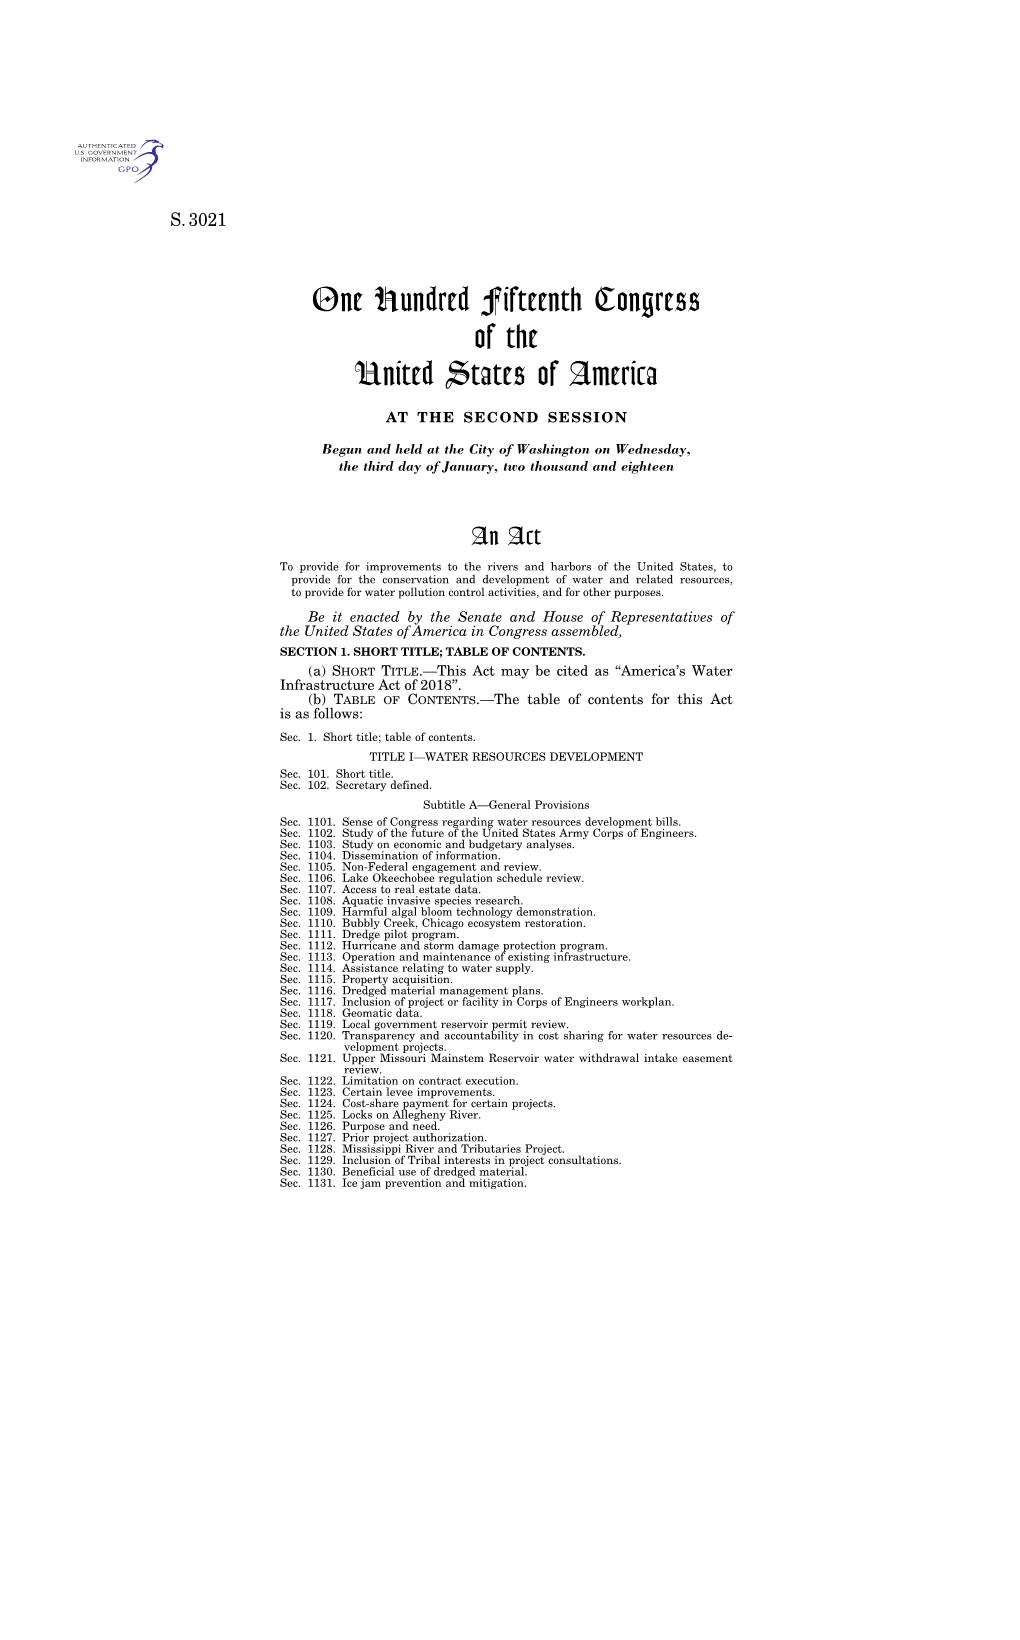 One Hundred Fifteenth Congress of the United States of America